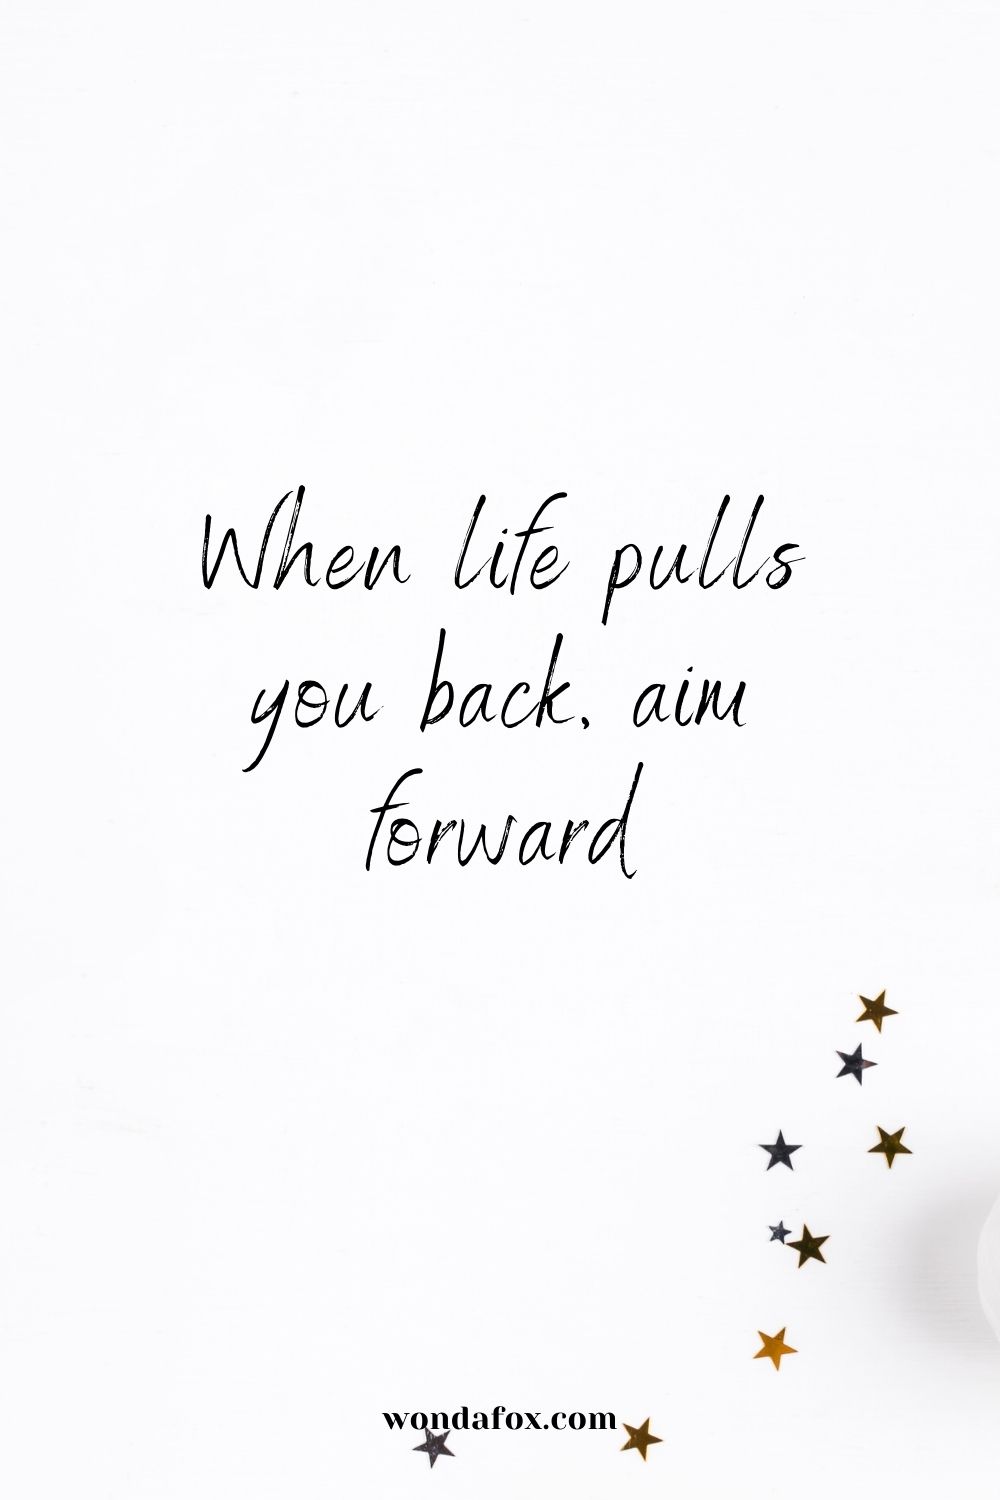 When life pulls you back, aim forwards